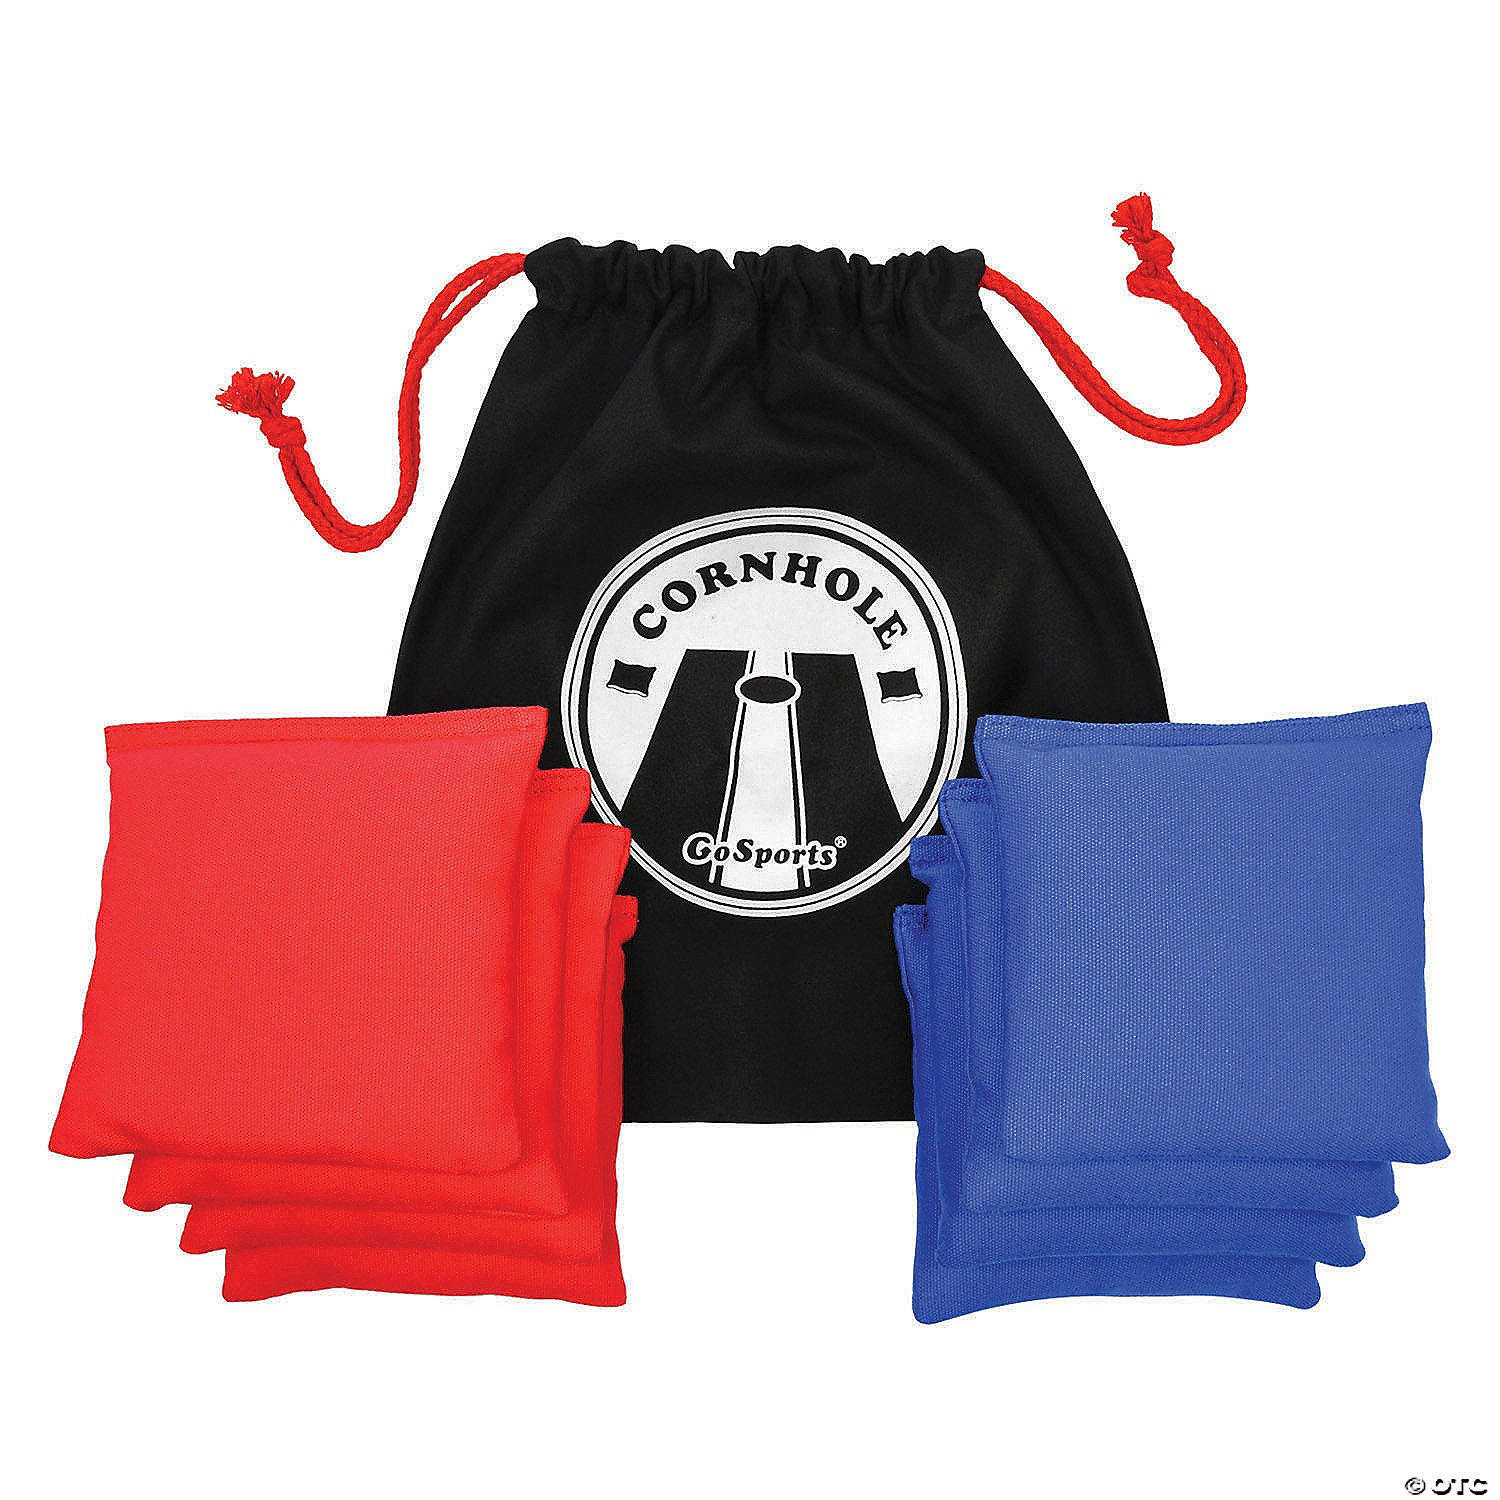 All Weather Cornhole Bean Bags Set of 8 Regulation Size&Weight for Cornhole Game 